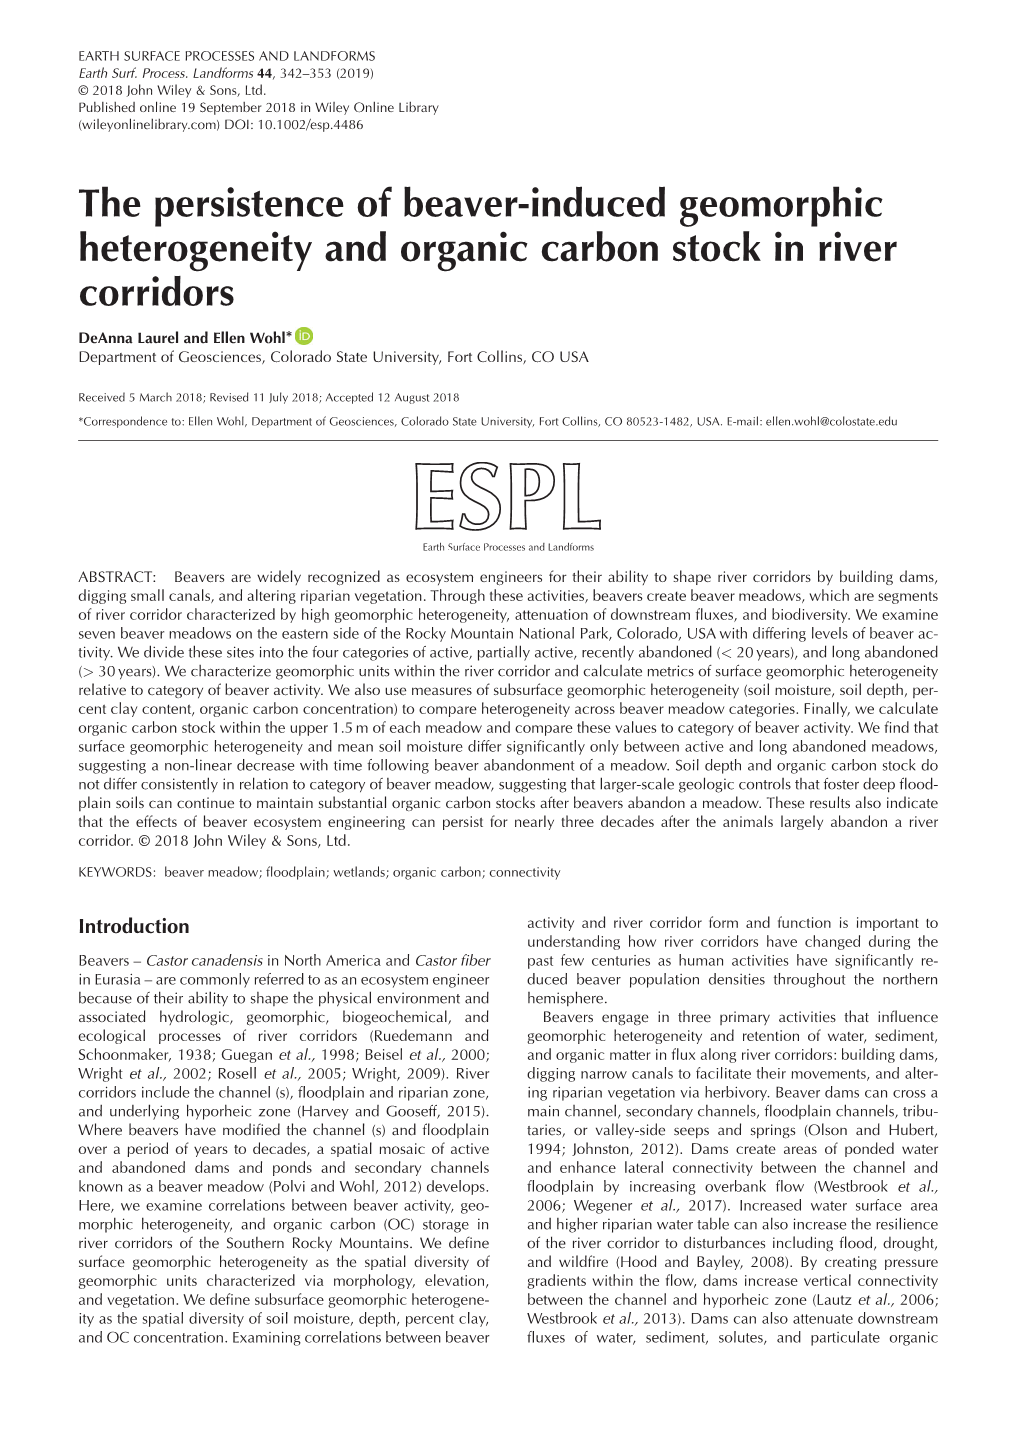 The Persistence of Beaver-Induced Geomorphic Heterogeneity and Organic Carbon Stock in River Corridors